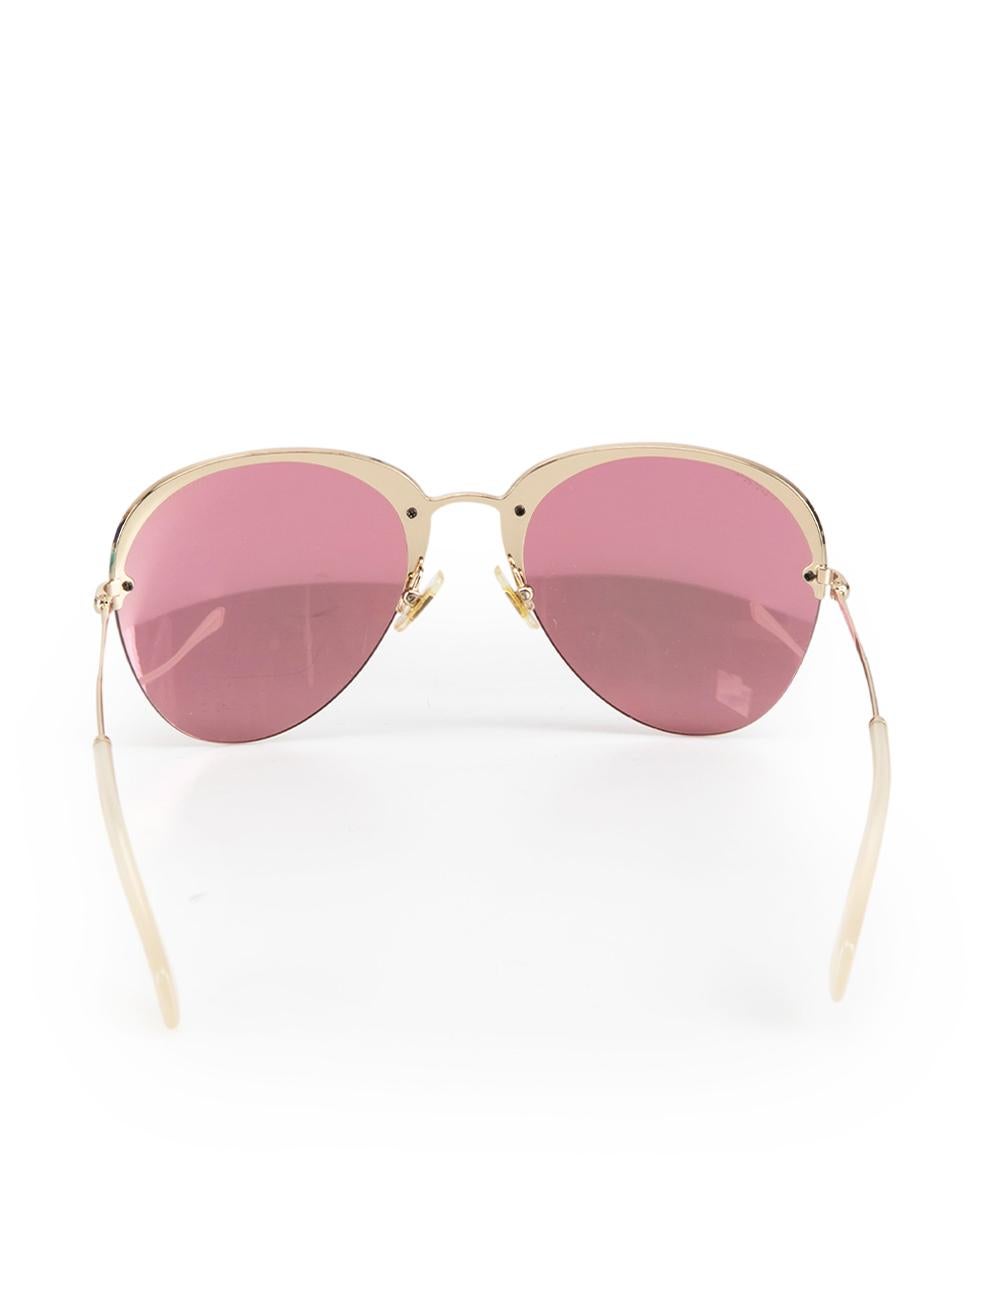 Miu Miu Pink Mirrored Lens Aviator Sunglasses In Excellent Condition For Sale In London, GB